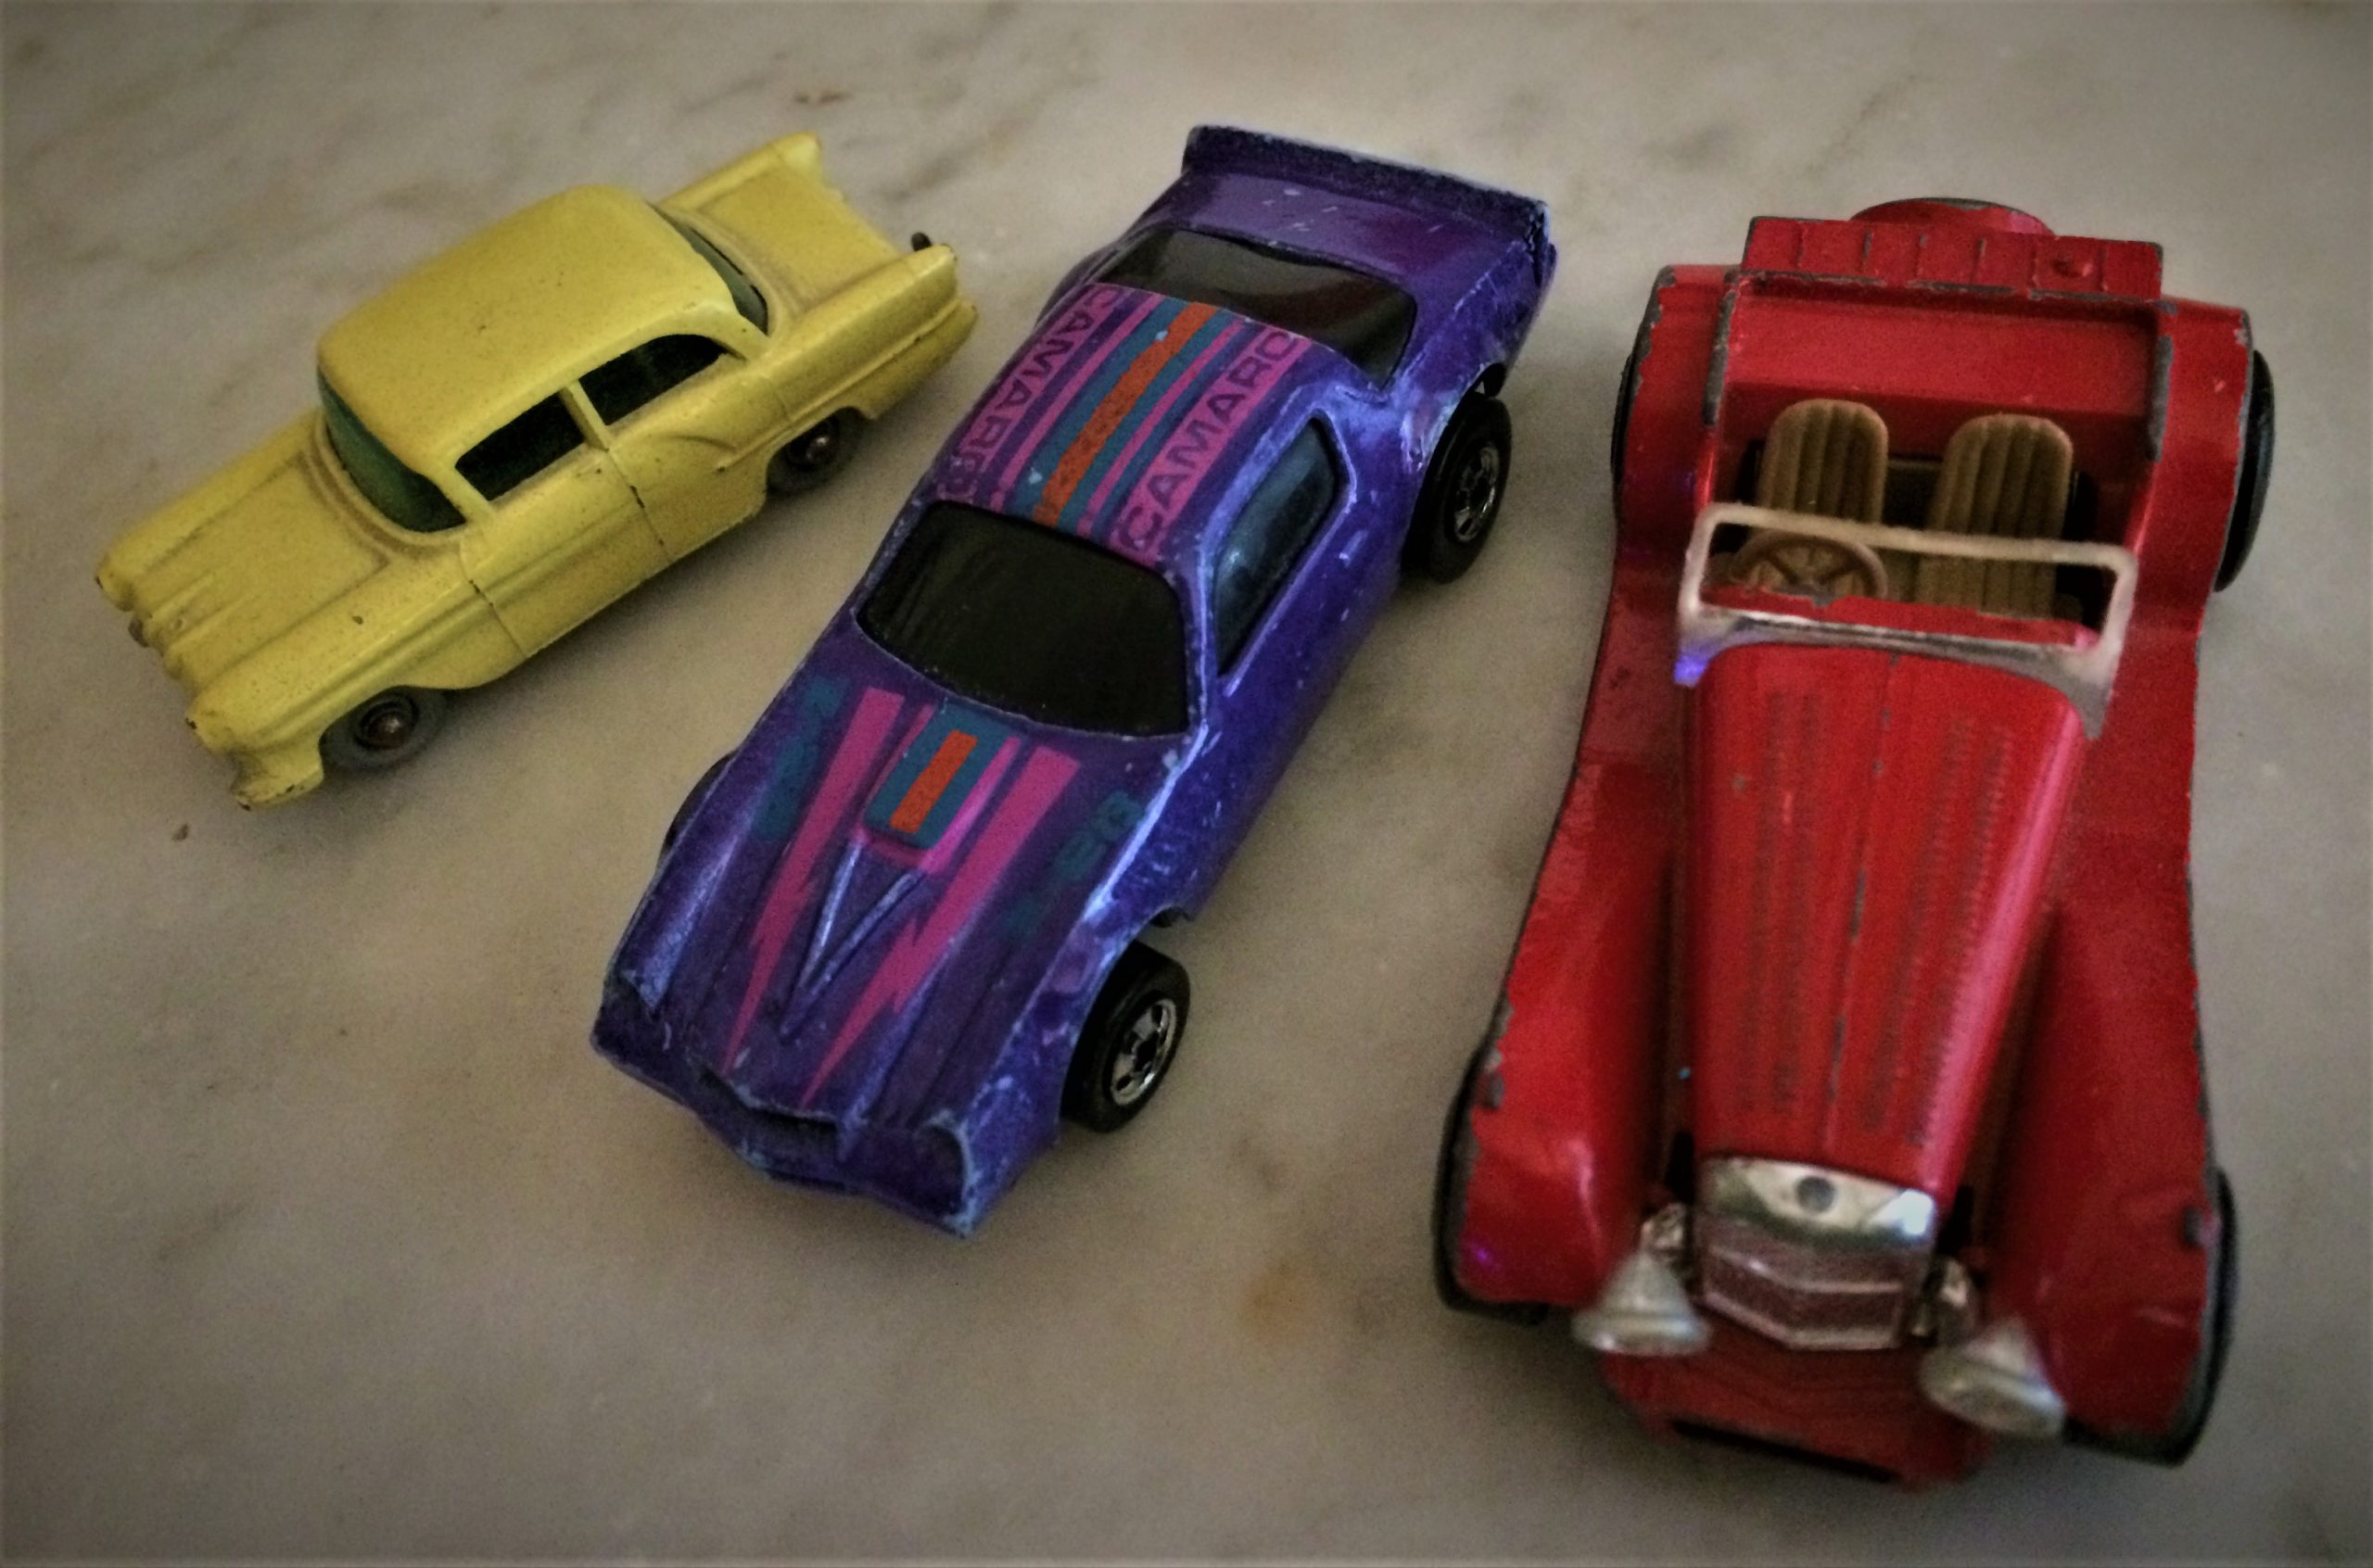 The Real-Life Crazy Cars That Inspired the Original Hot Wheels